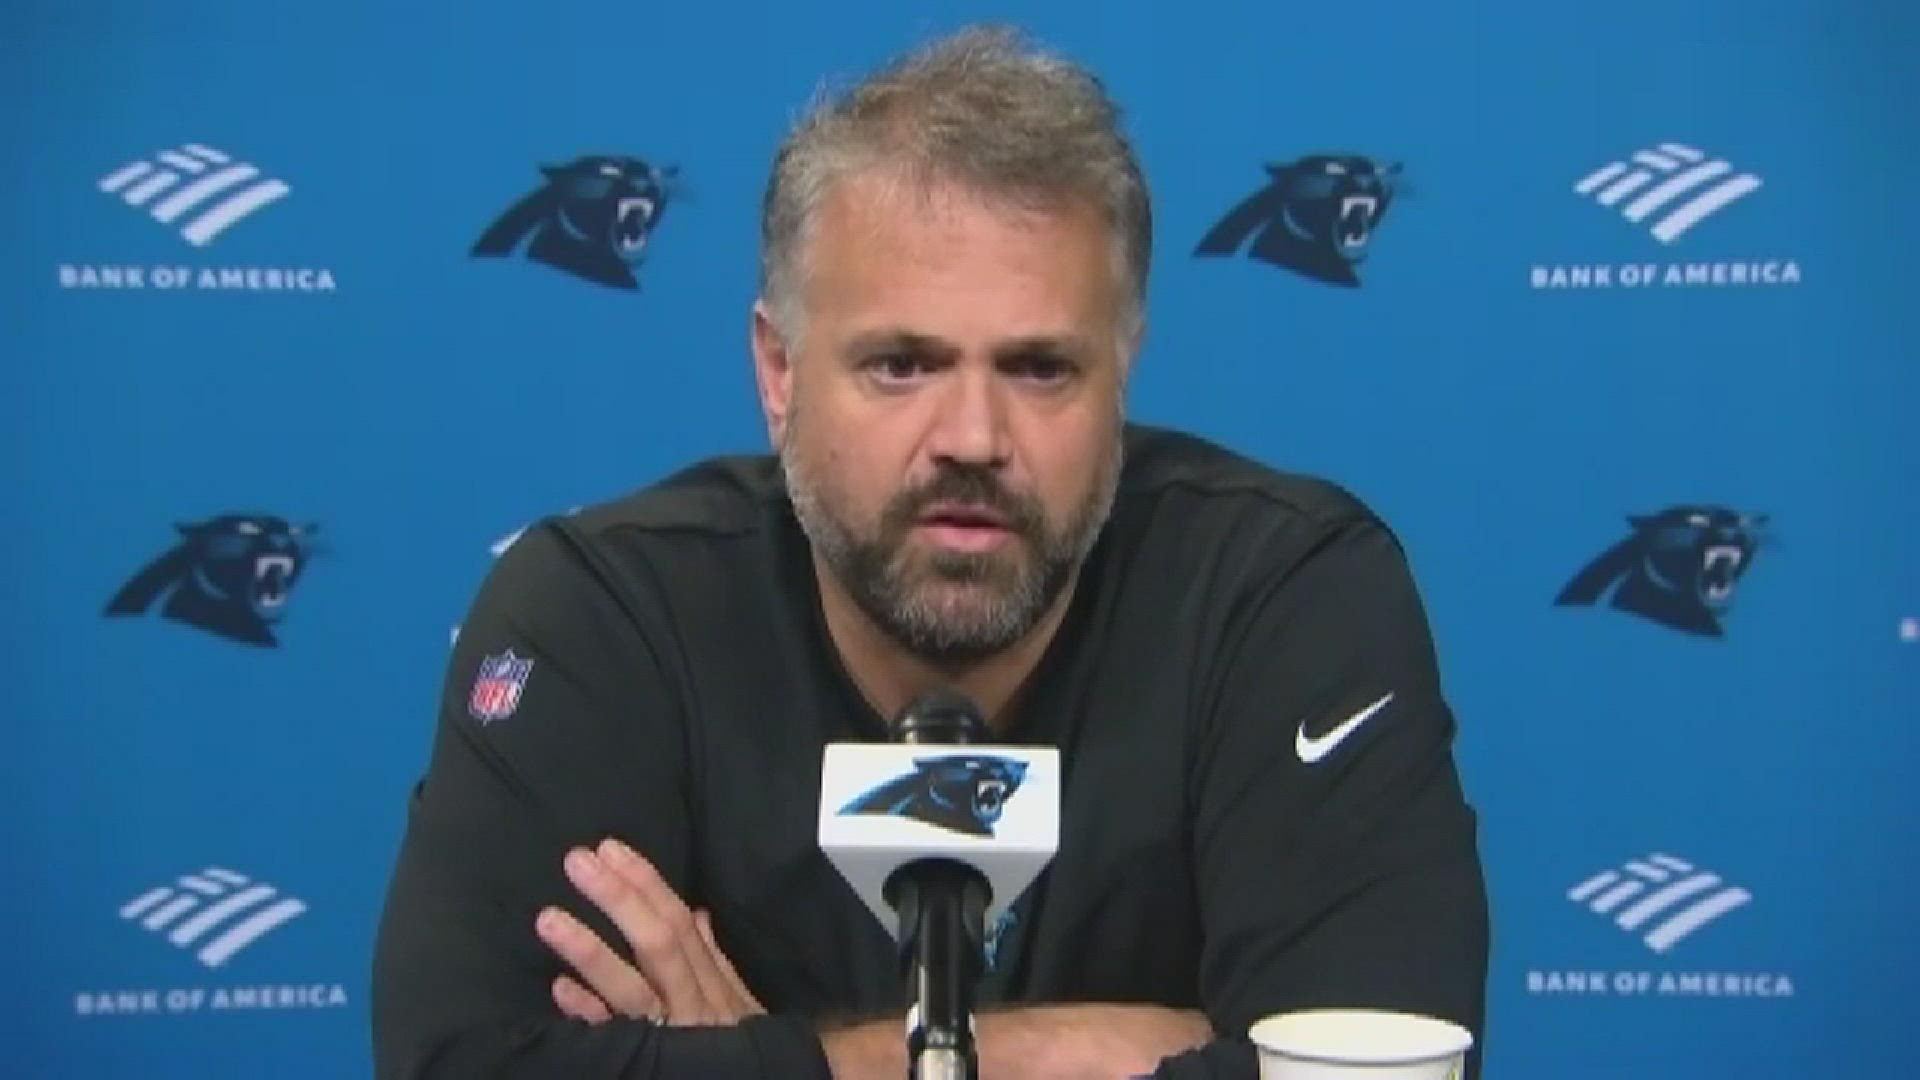 Carolina Panthers head coach Matt Rhule responds to the rumors of him leaving the NFL for a college job.